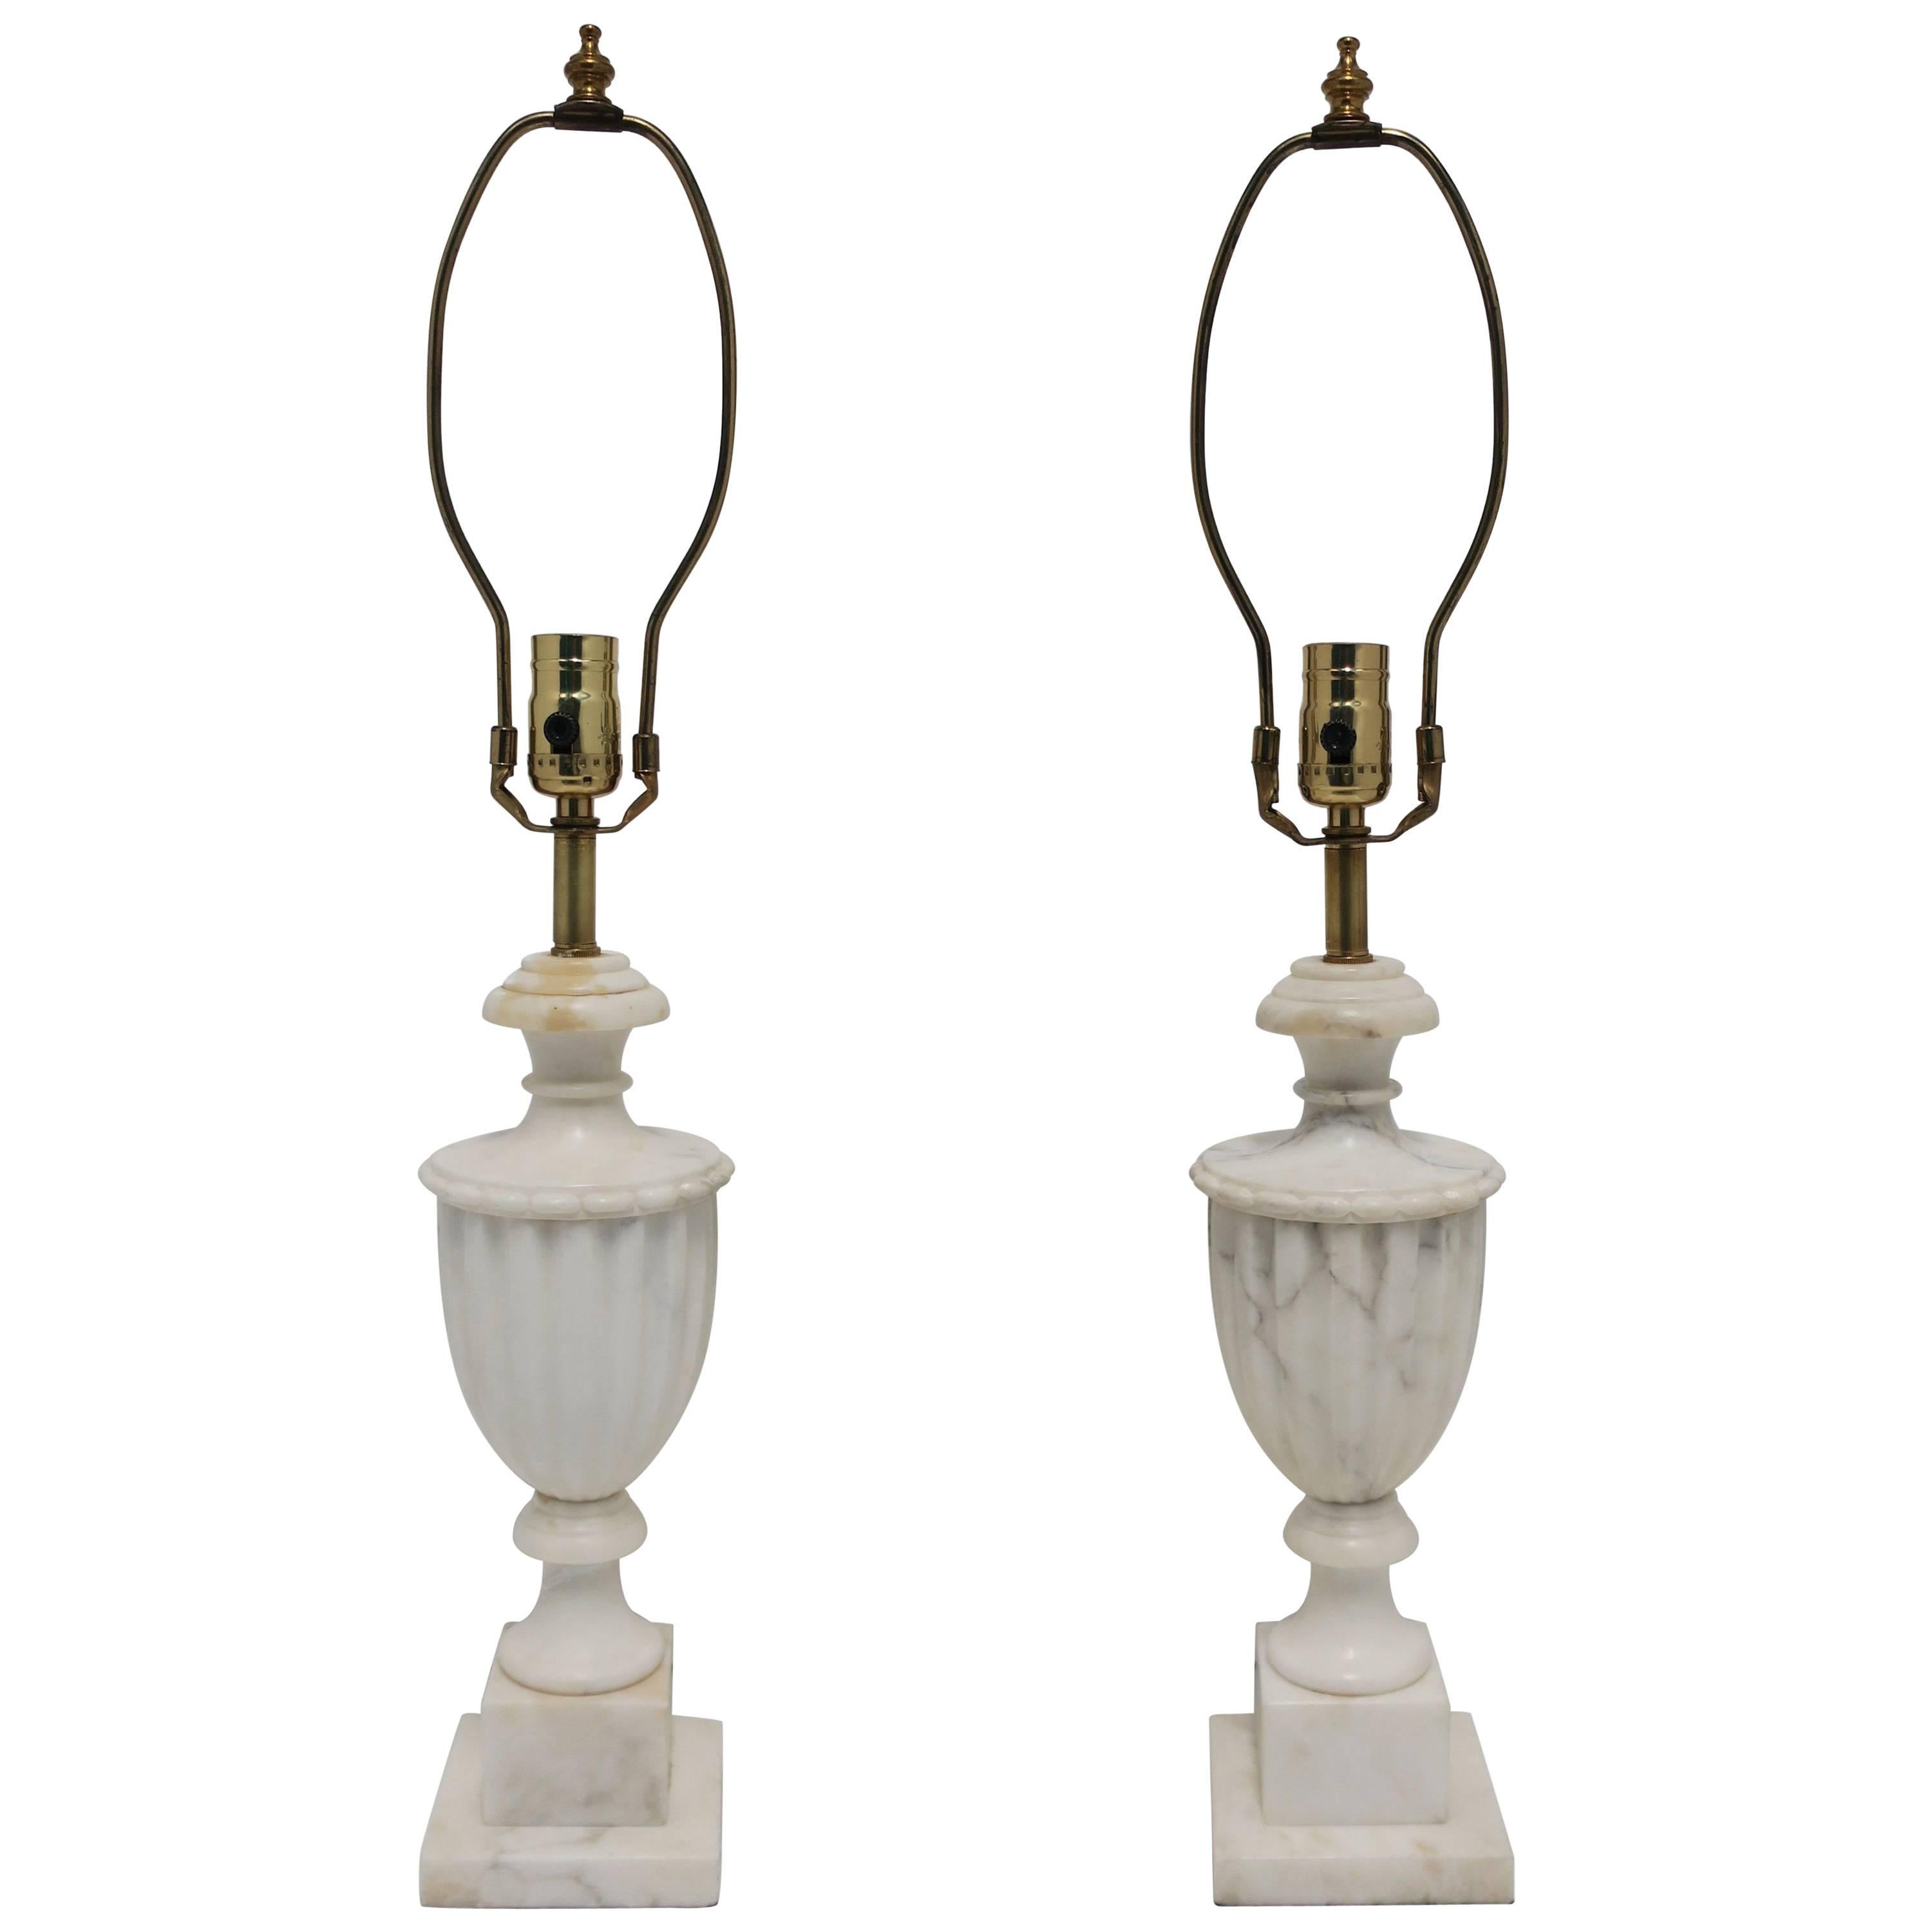 Pair of Italian Classical Roman White Marble Urn Table Lamps